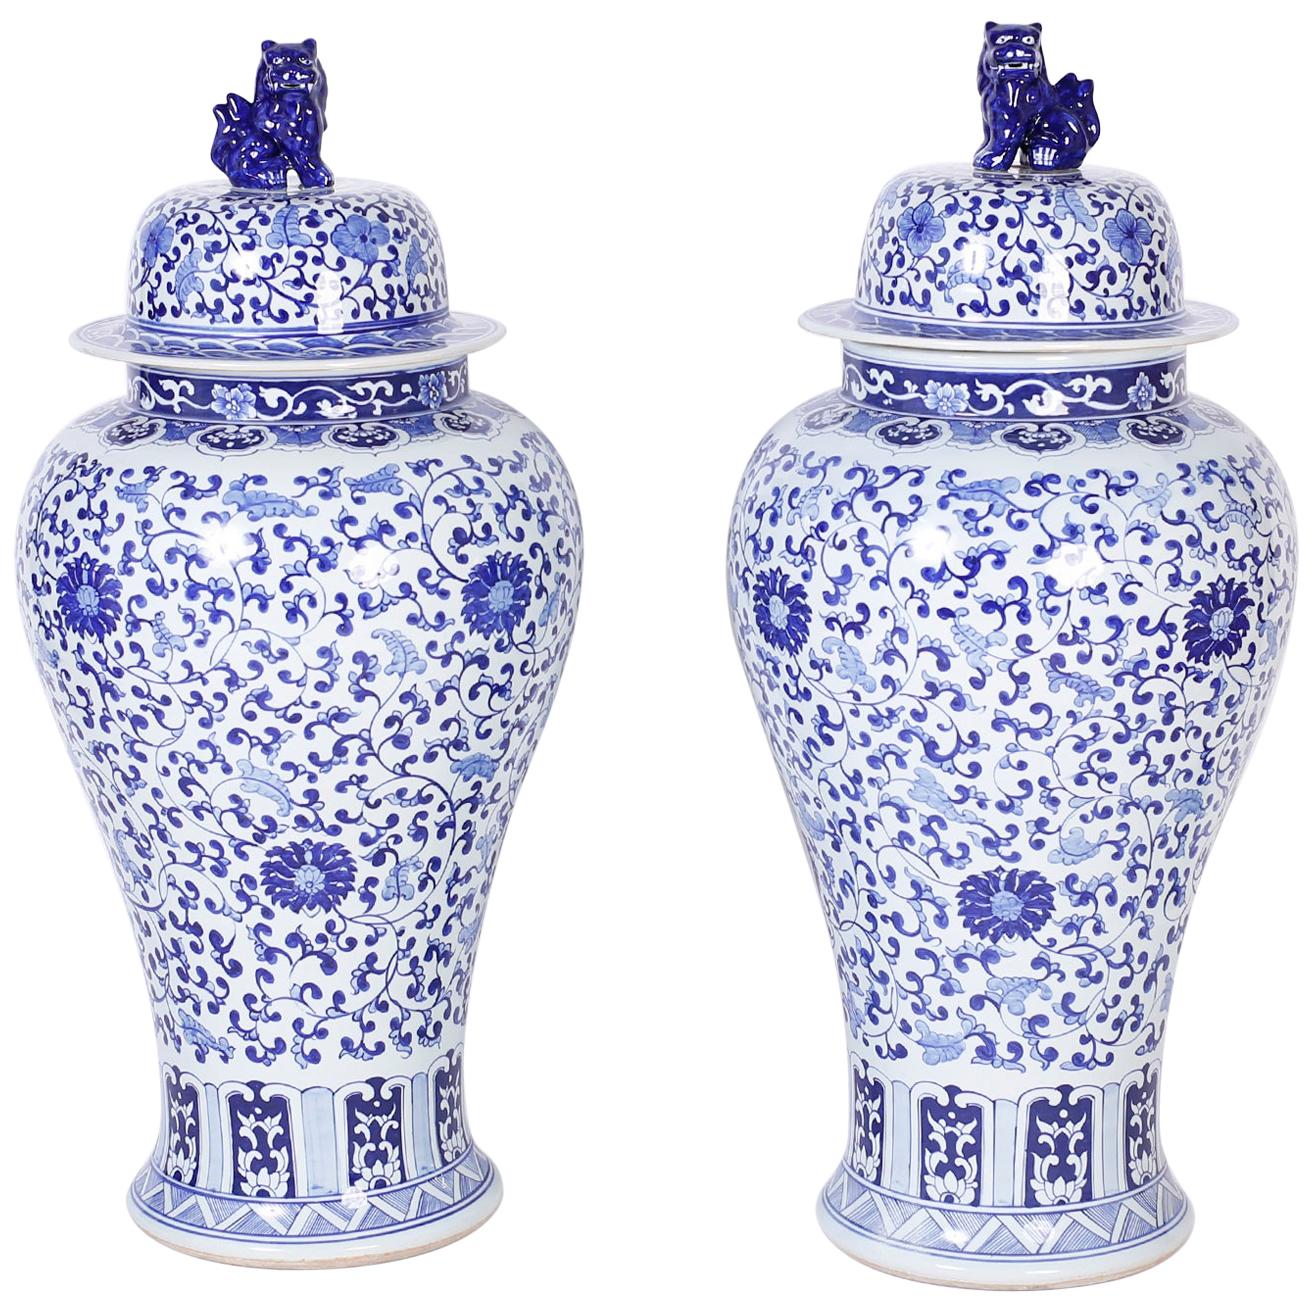 Large Pair of Blue and White Porcelain Palace Urns